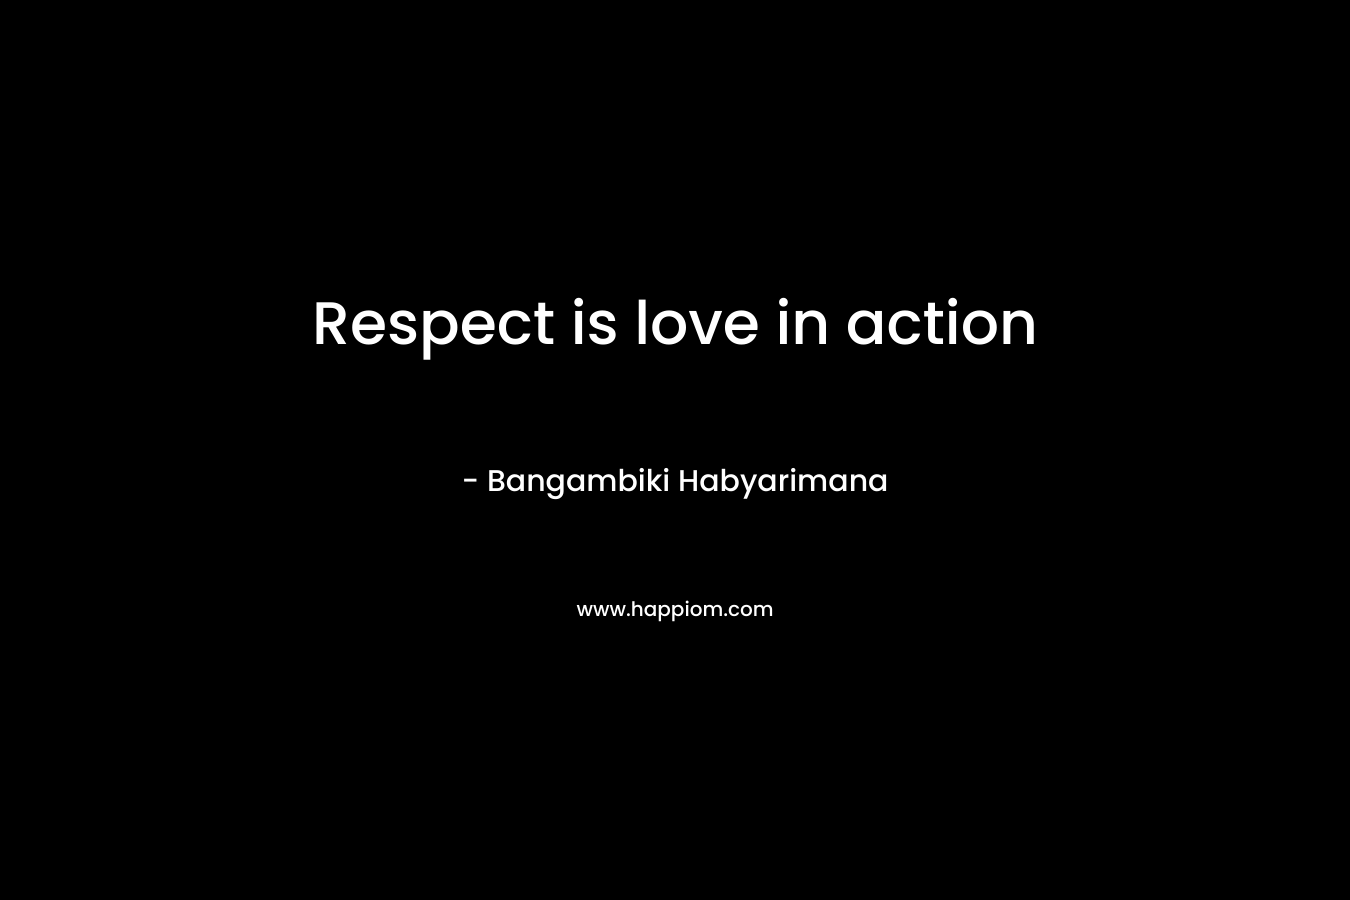 Respect is love in action